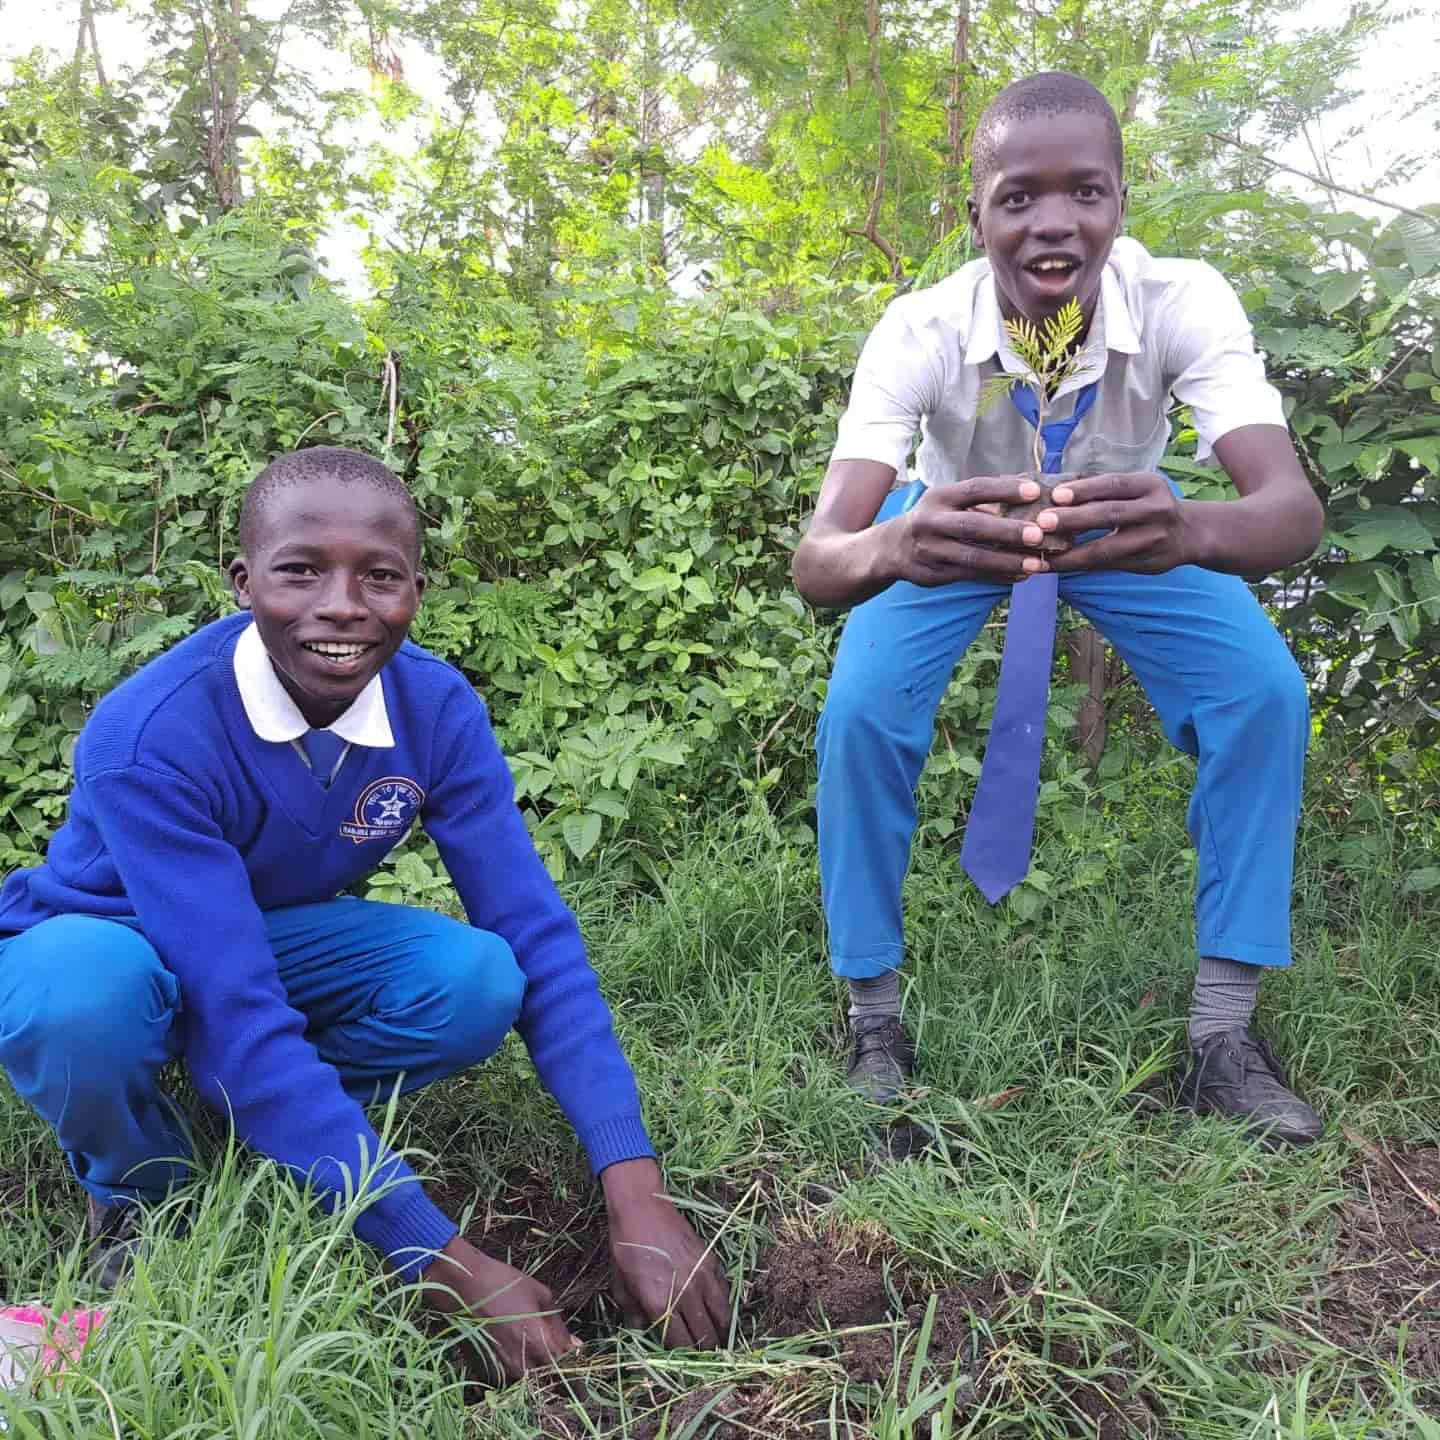 Two school boys smile, one holding a small tree sapling about to be planted